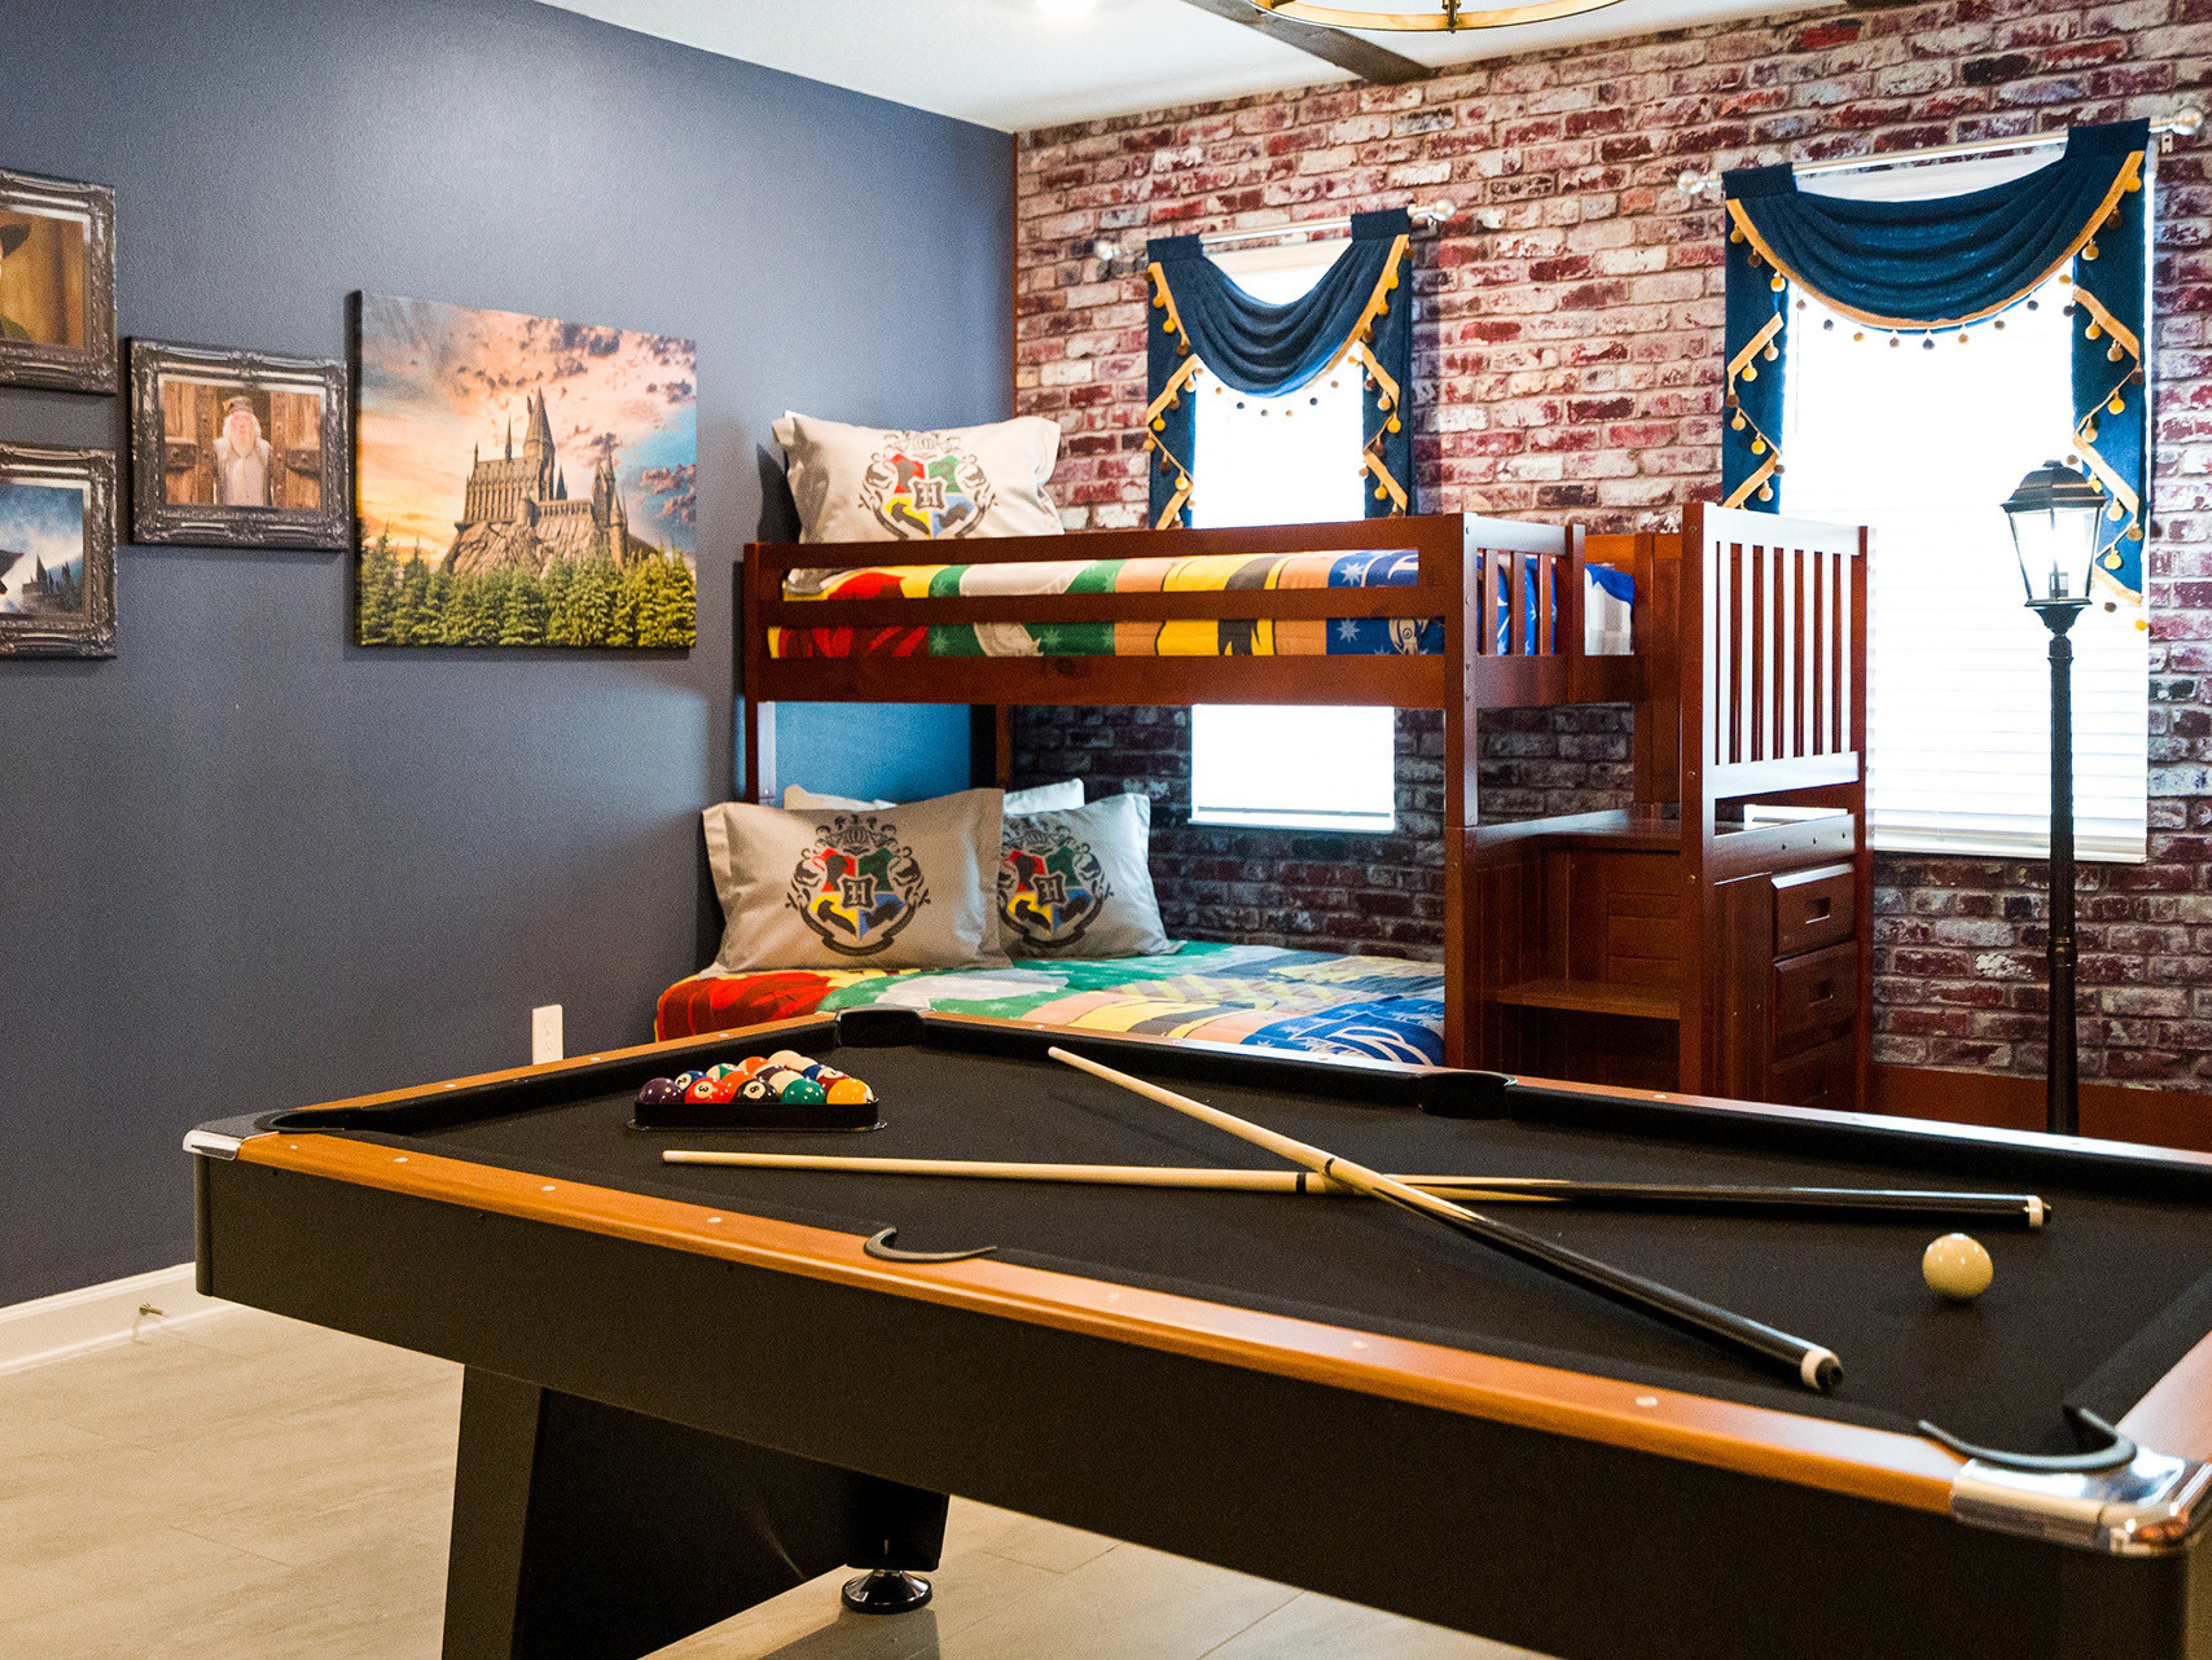 Championsgate 2031 vacation rental game room with pool table